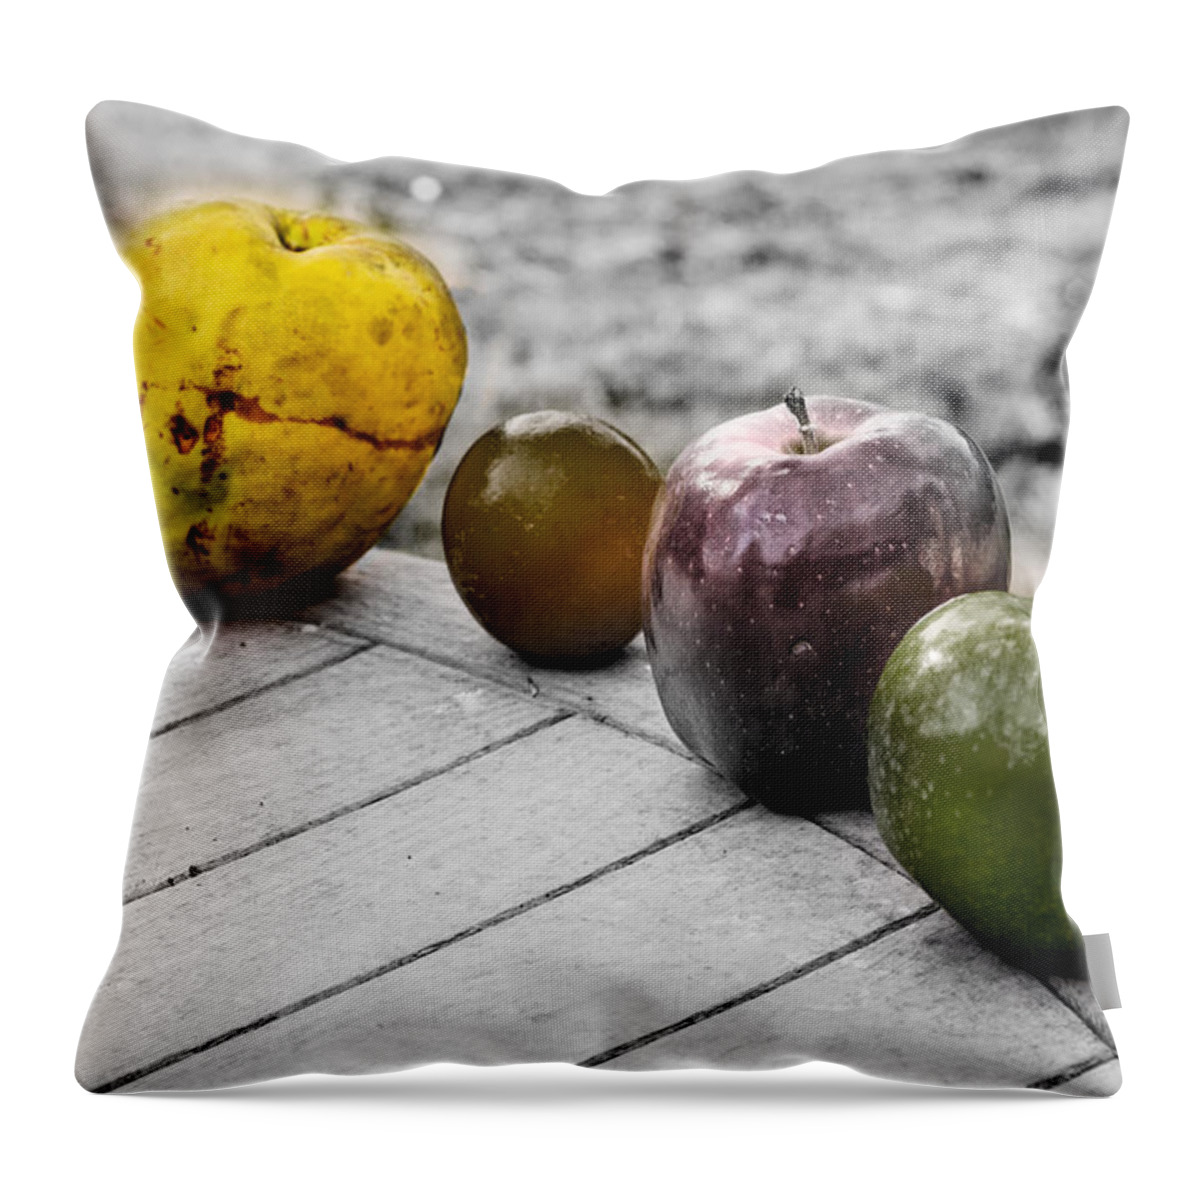 Quince Throw Pillow featuring the photograph Quince by Metaphor Photo